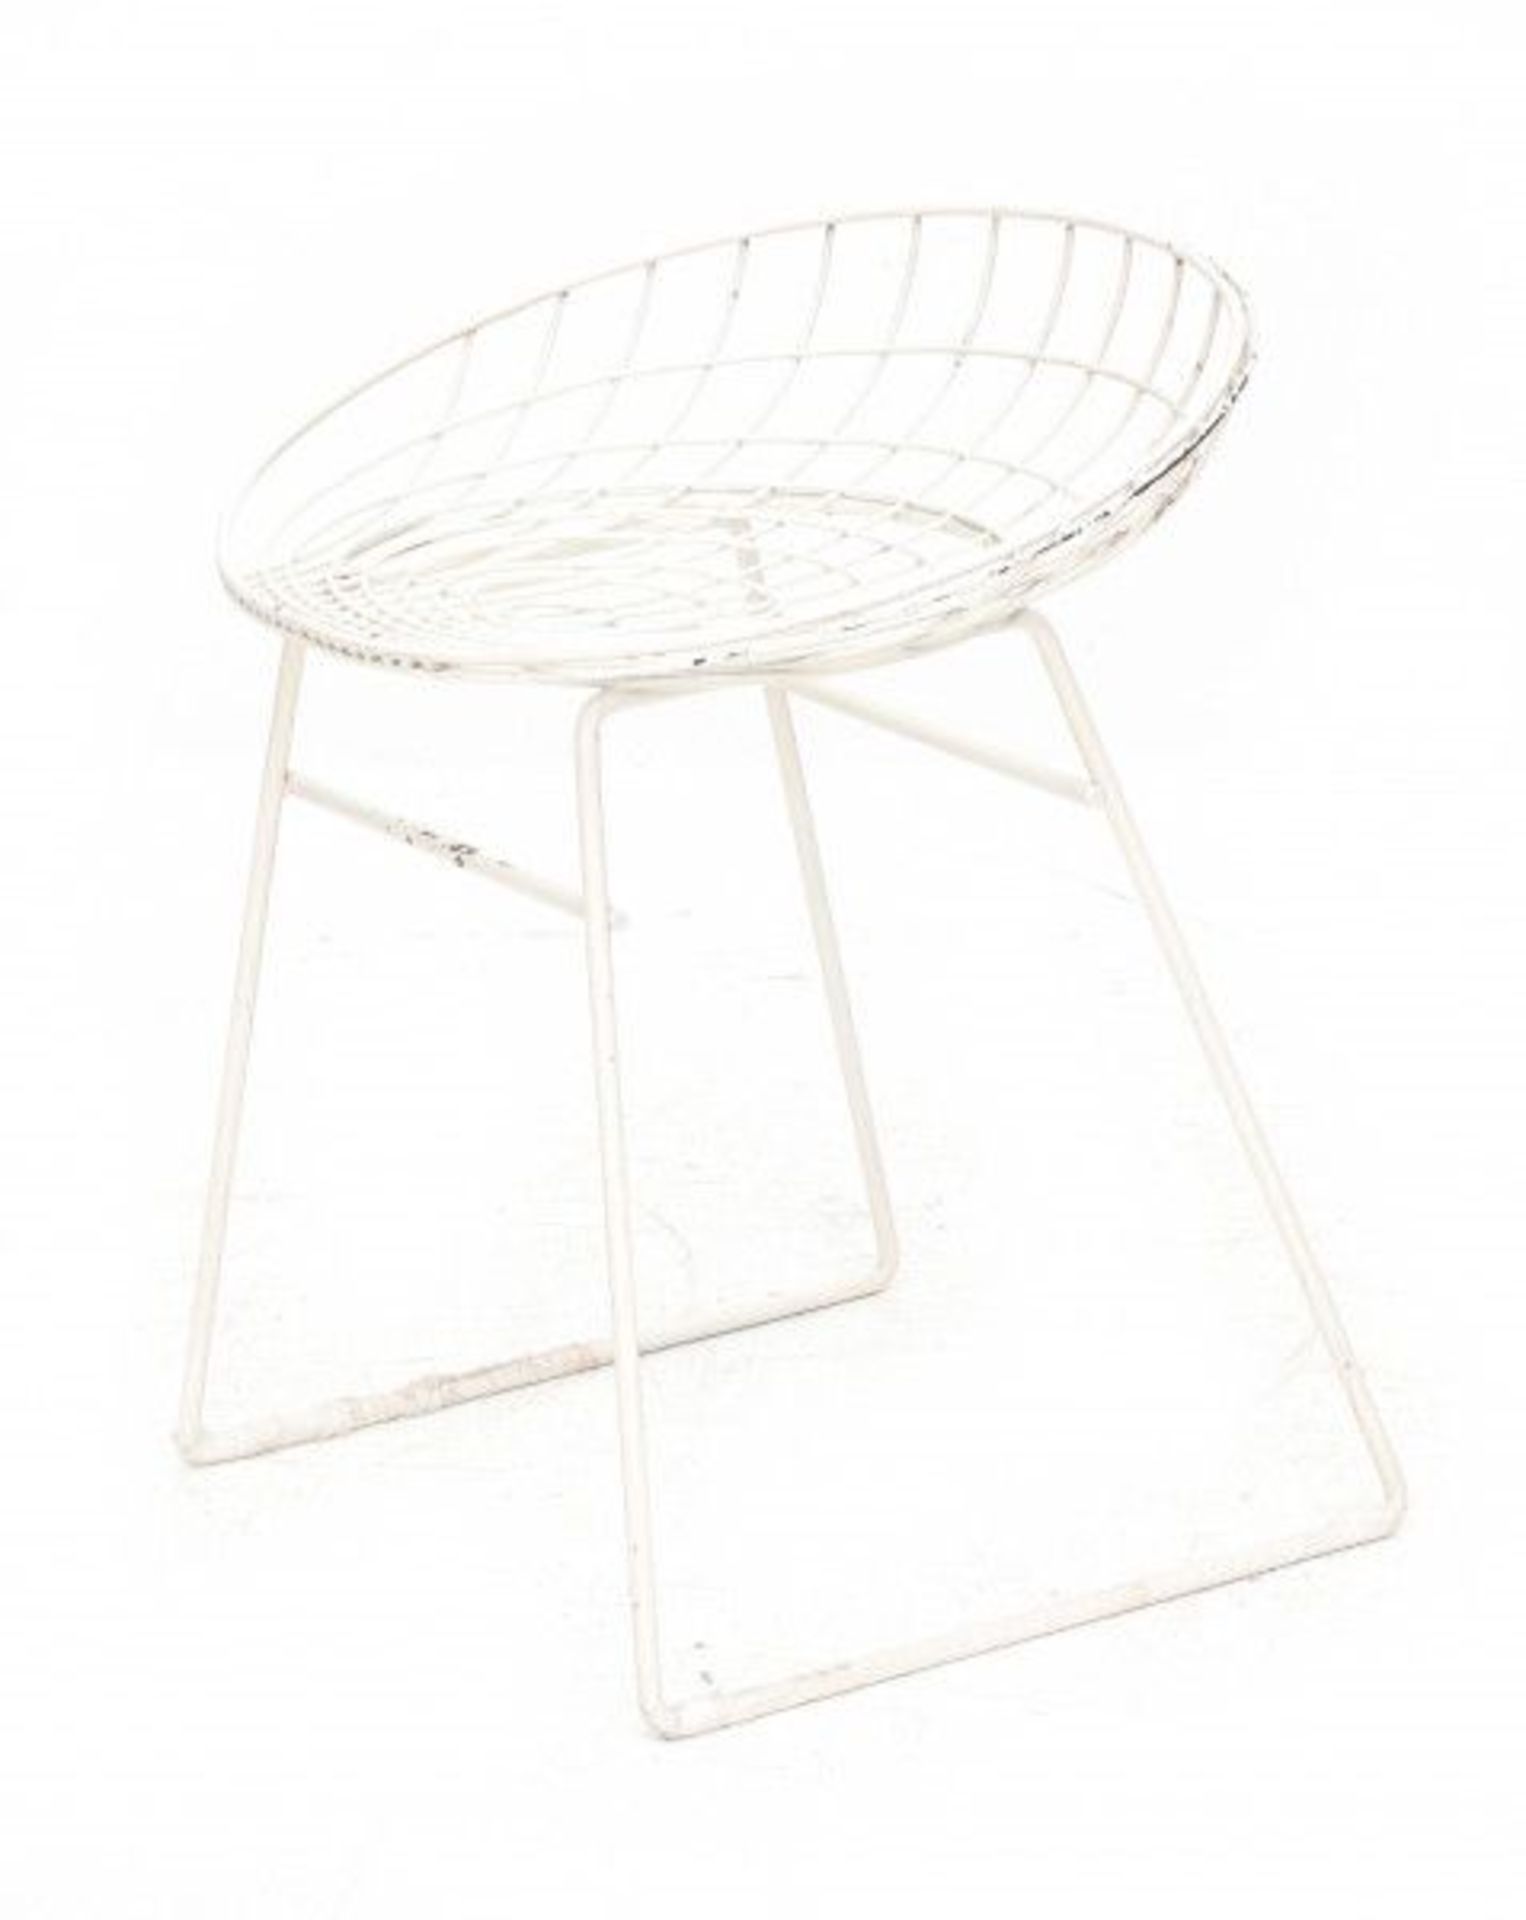 Cees Braakman (1917-1995)A white lacquered wire metal stool, model KM 05, produced by Pastoe, - Bild 2 aus 2